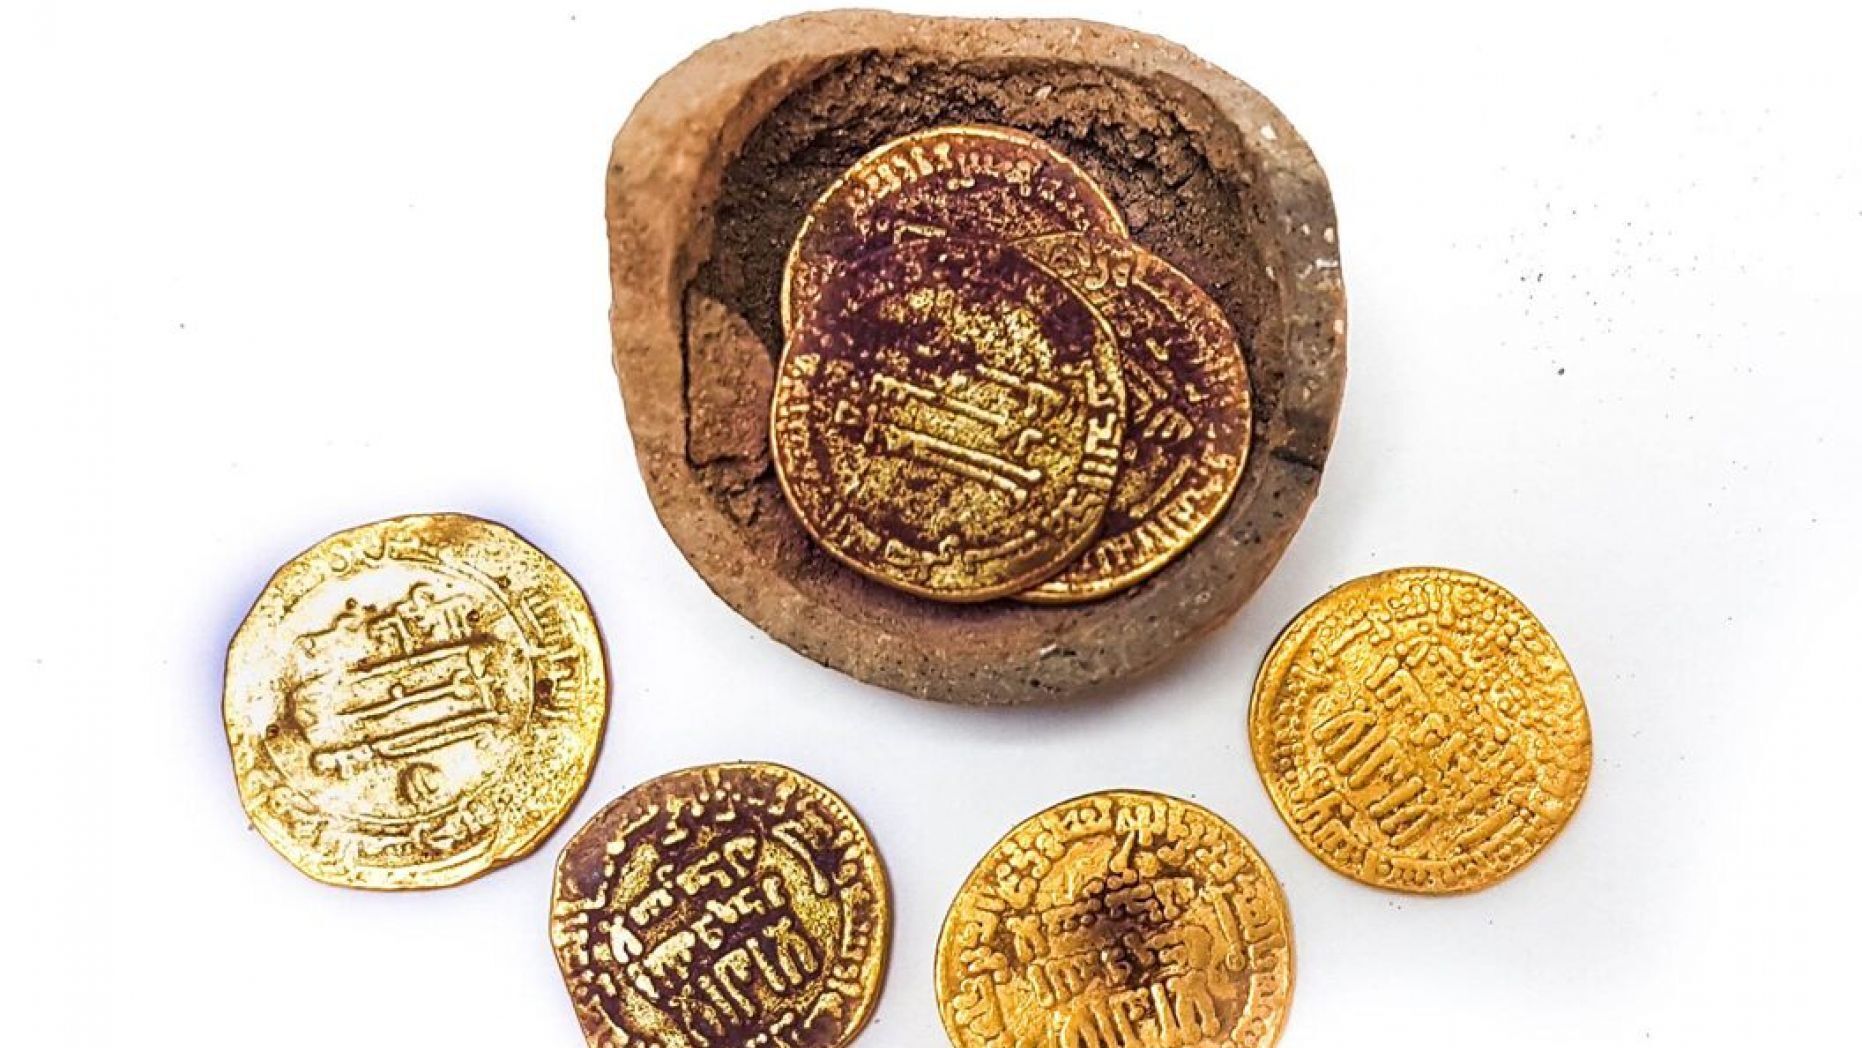 gold coins found in ancient pot